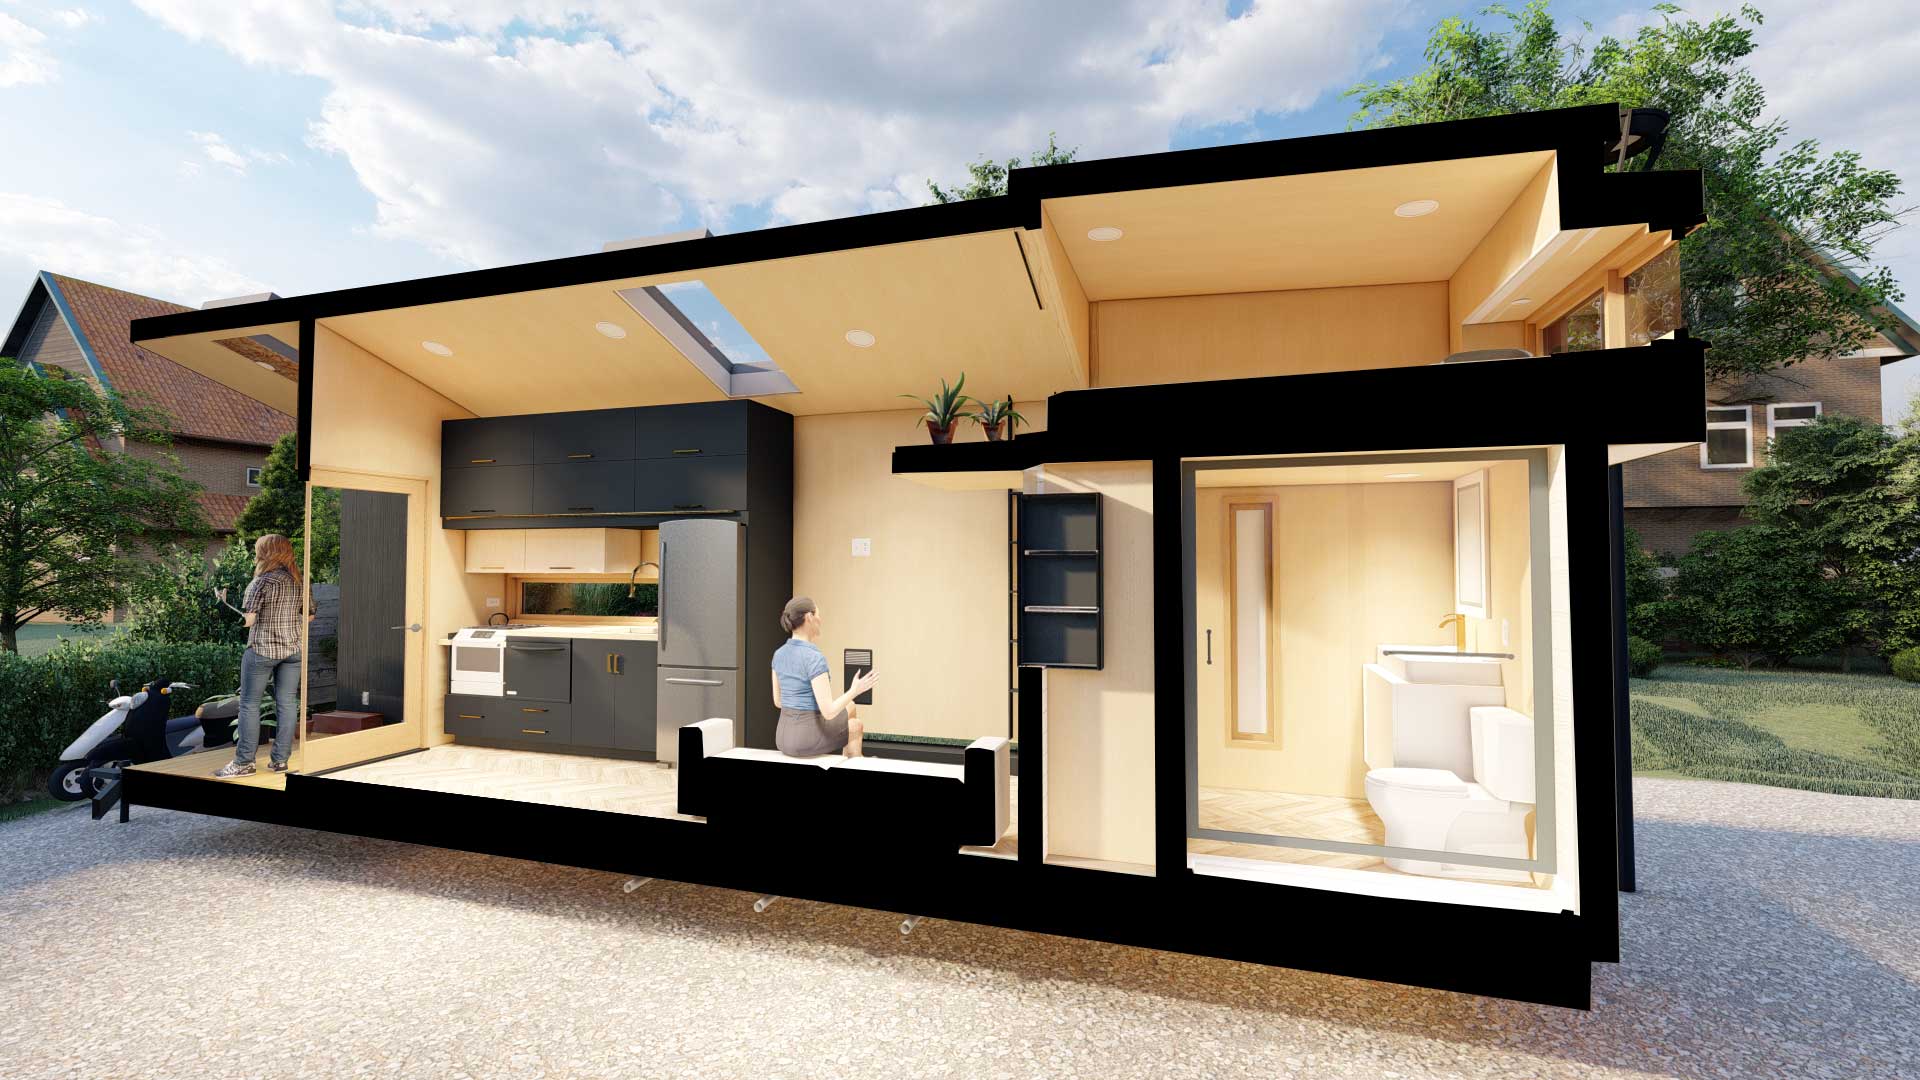 Cutaway 3D model outside view of the Journey tiny home